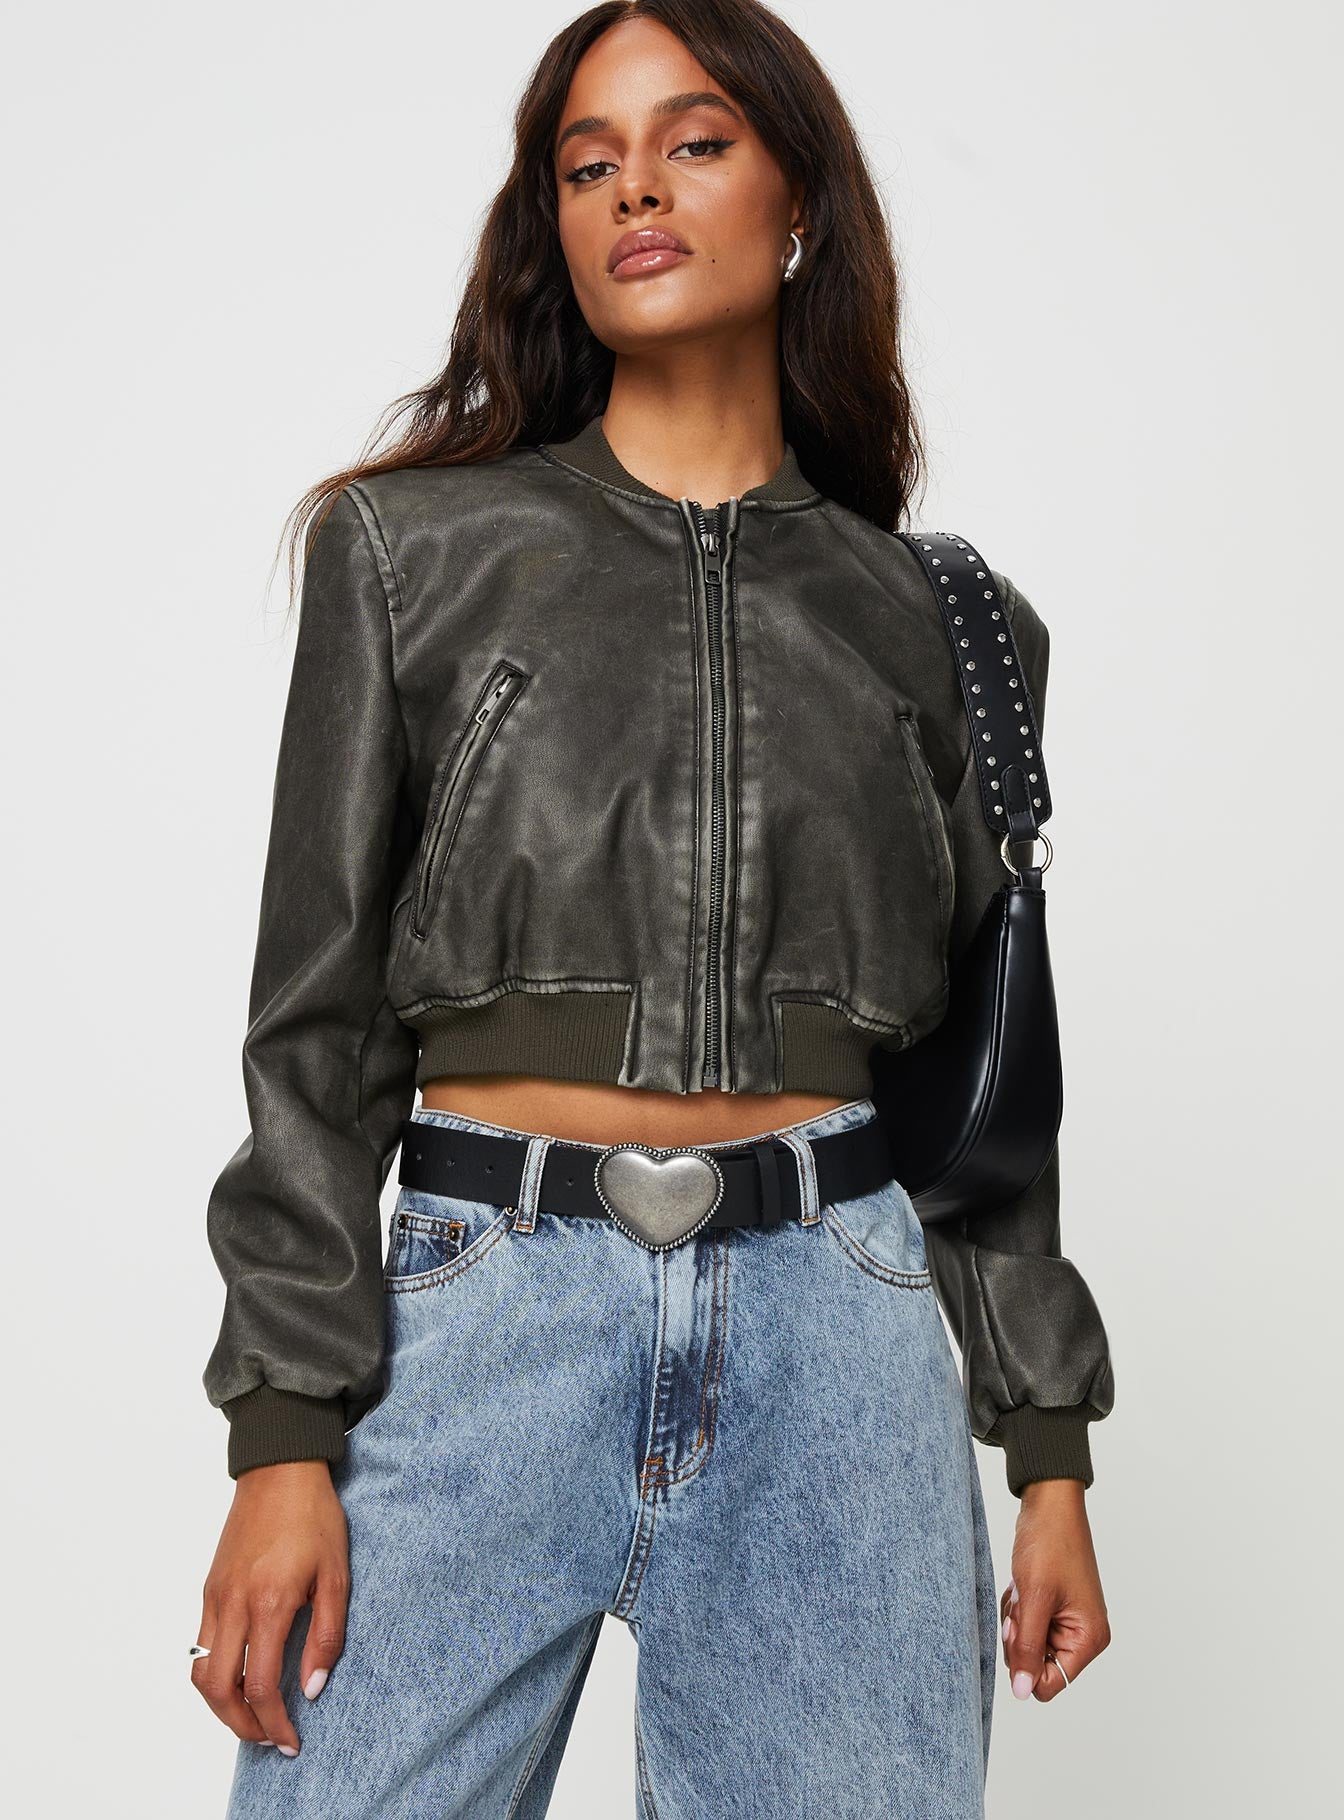 Pin on Bomber Jackets For Women's